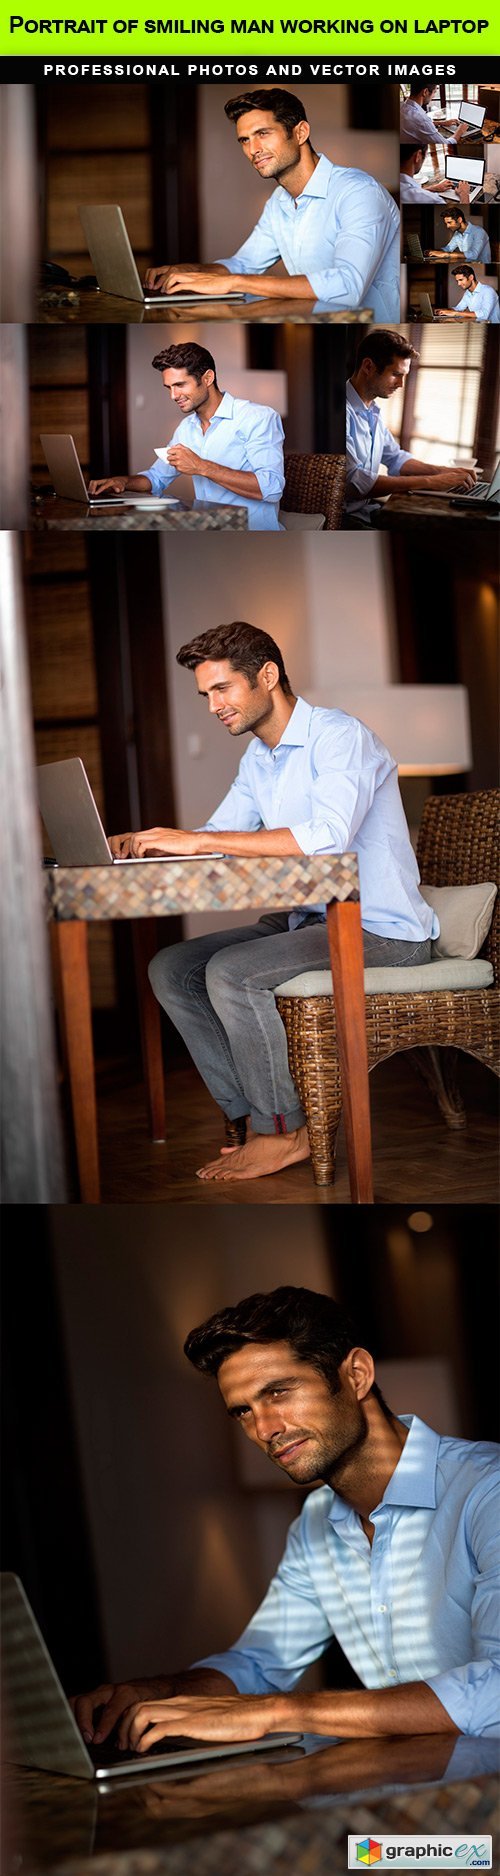 Portrait of smiling man working on laptop